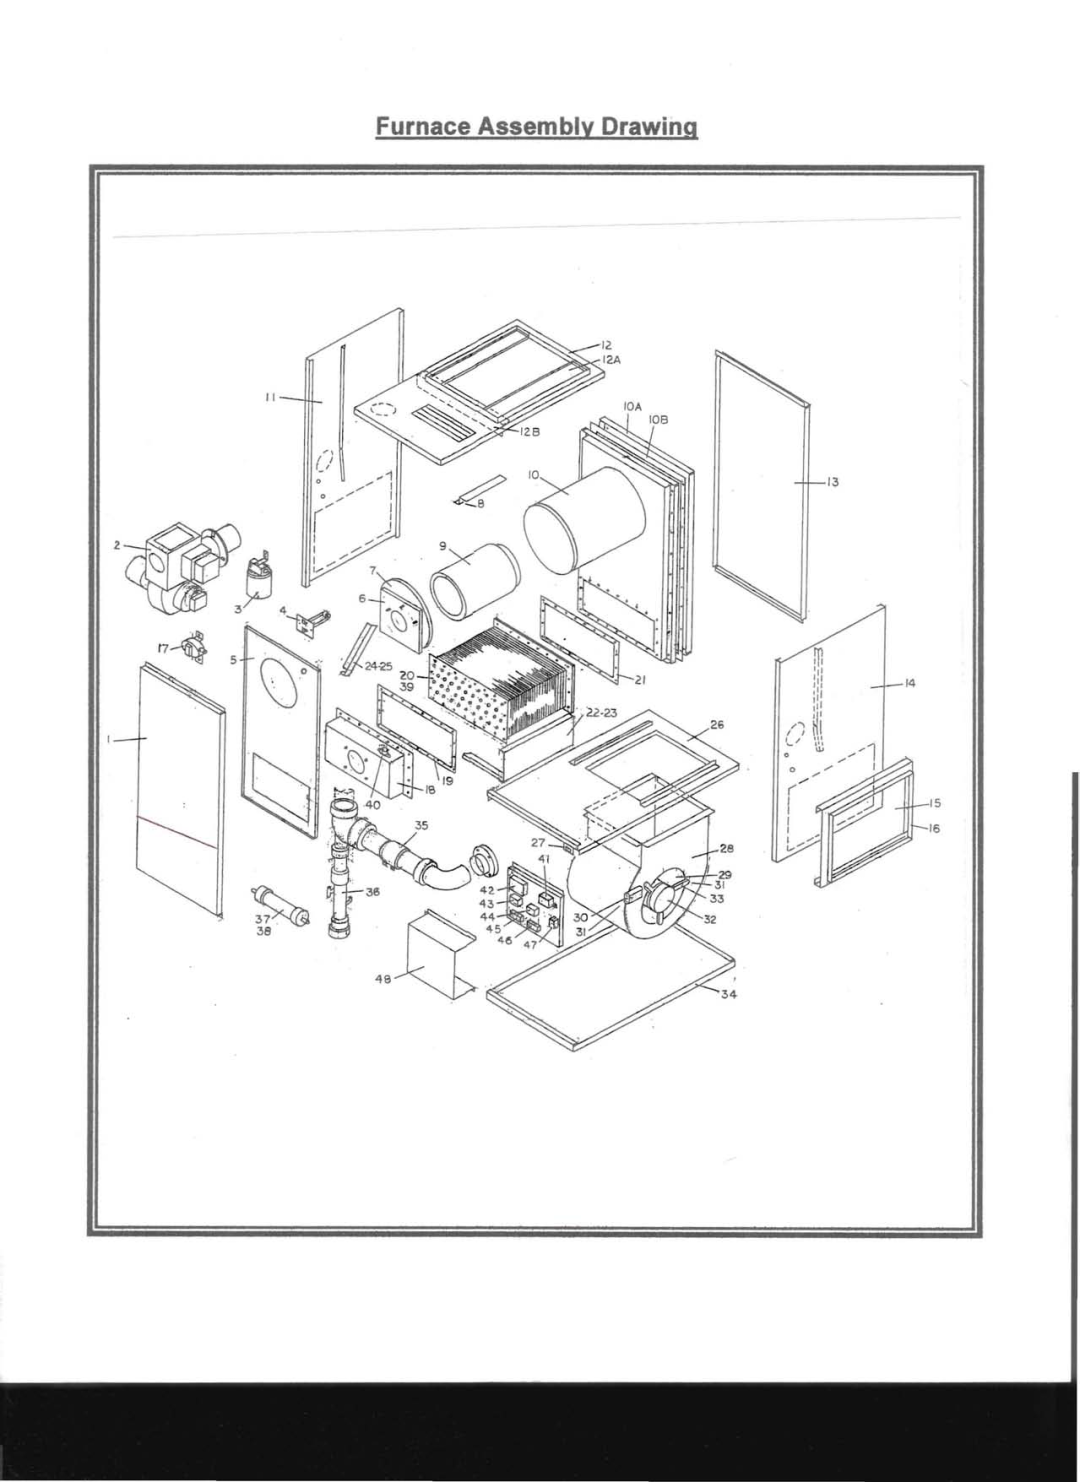 Adams Condensing Oil-Fired Furnace operation manual Furnace Assembly Drawing, I / I ~\~ 